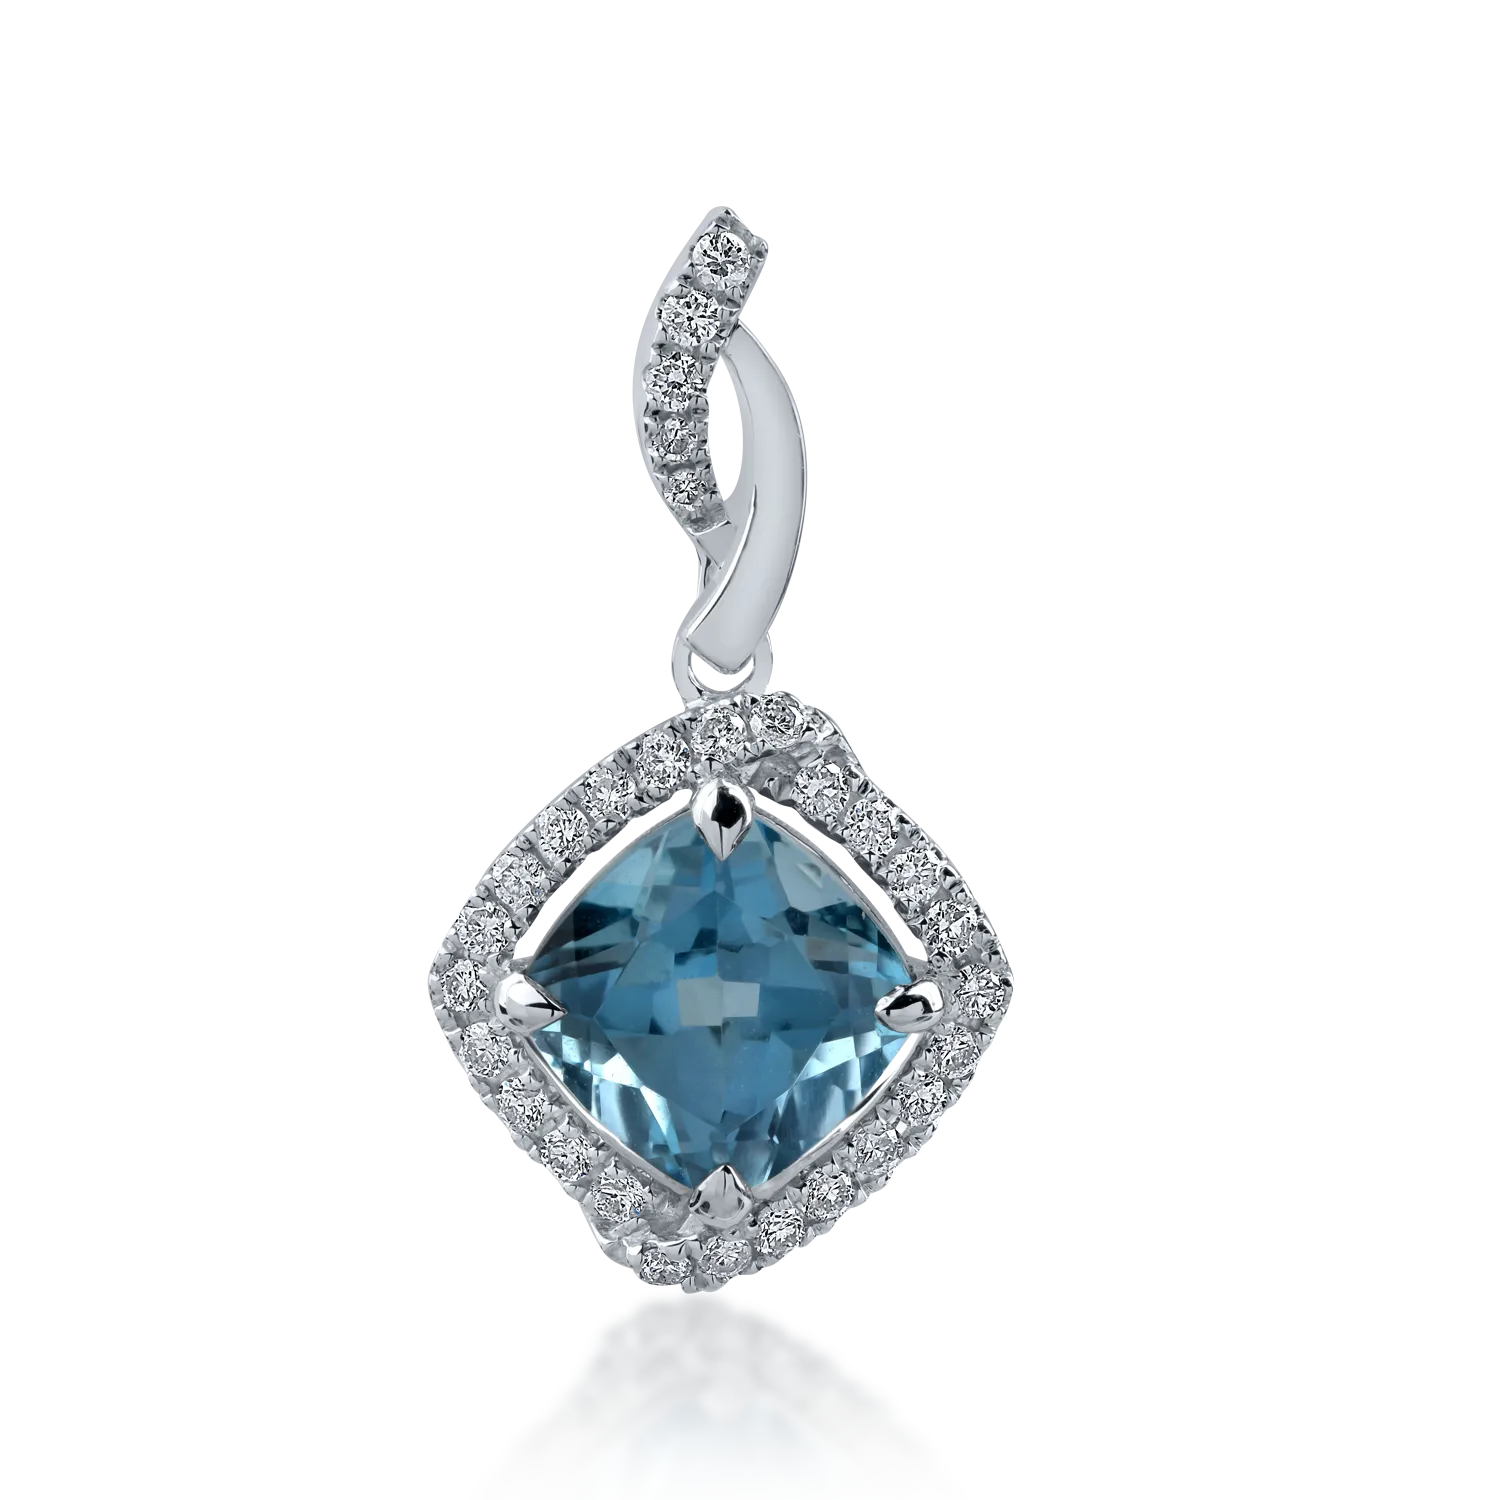 White gold pendant with 1.94ct london blue topaz and 0.193ct diamonds